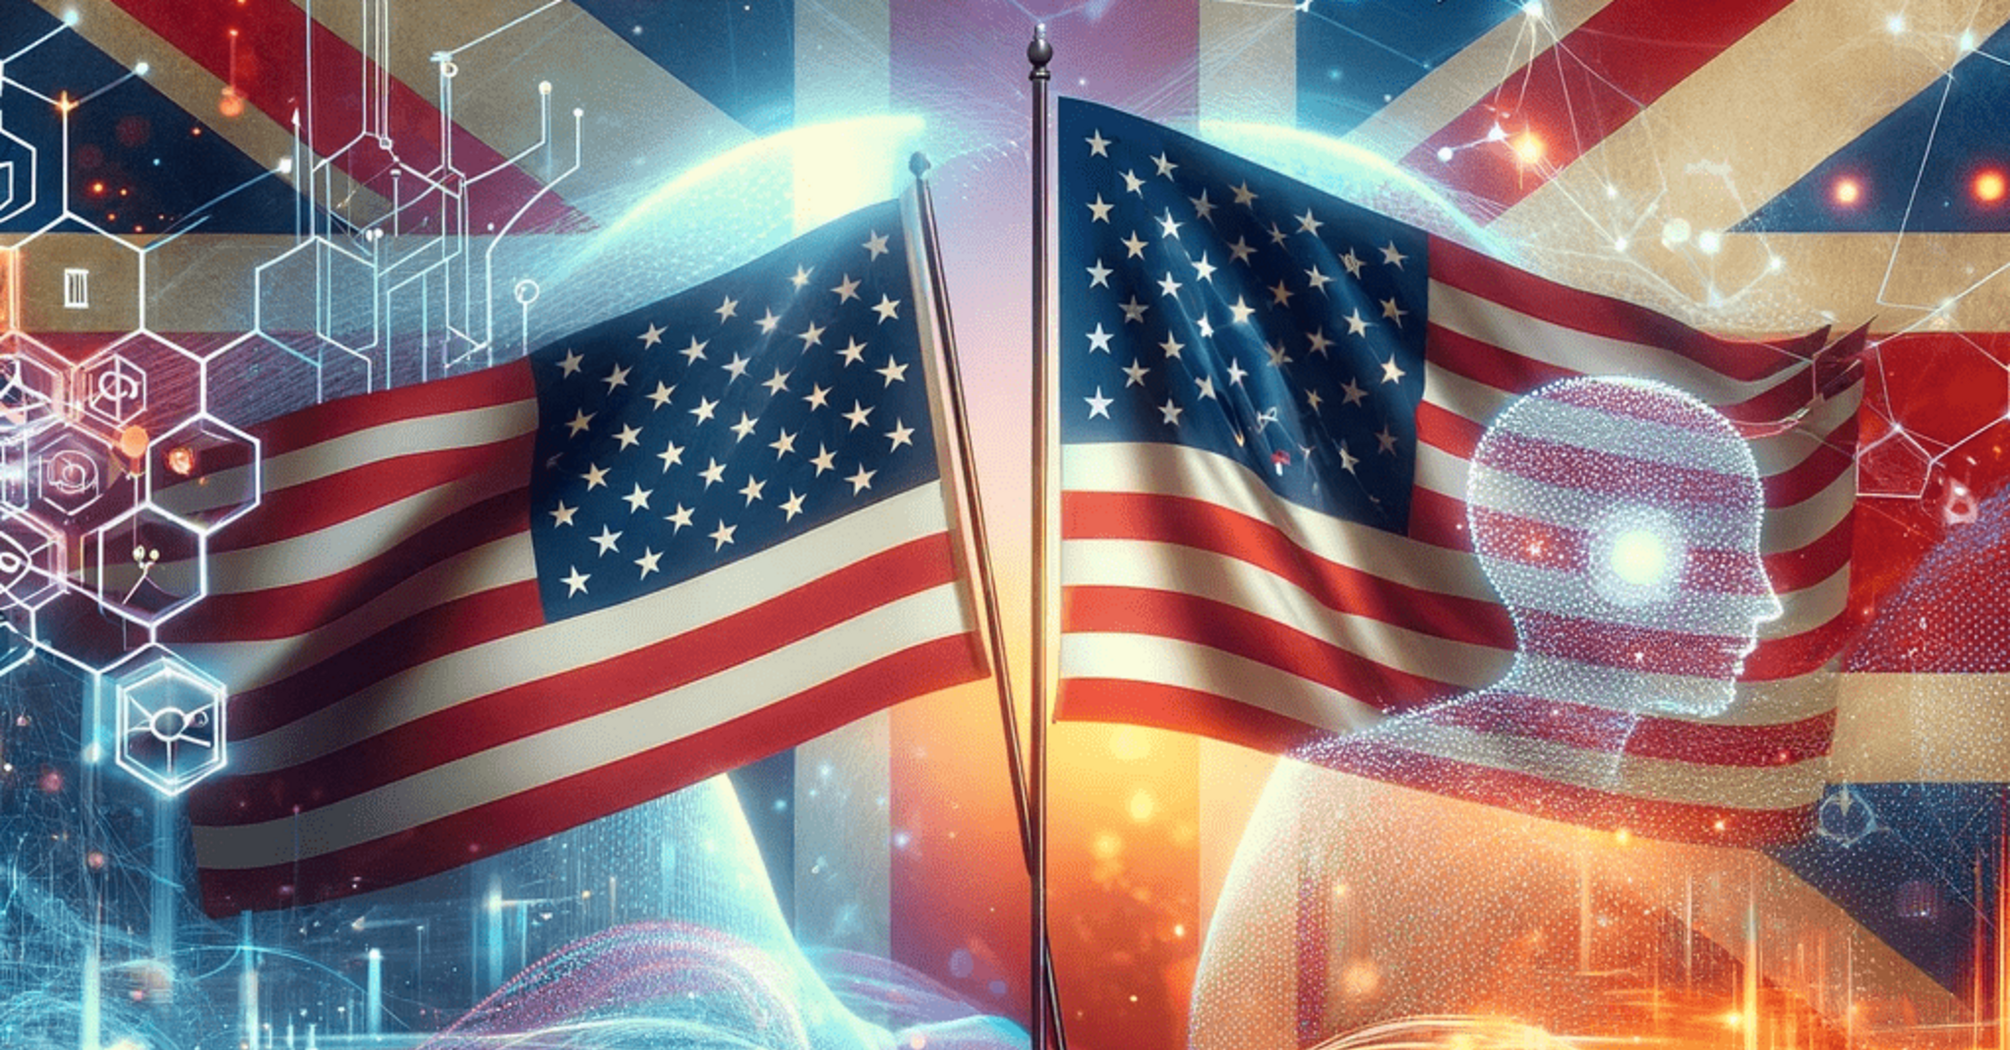 Illustration of UK and US flags intertwined, symbolizing their AI safety partnership, with digital AI and safety symbols in the background